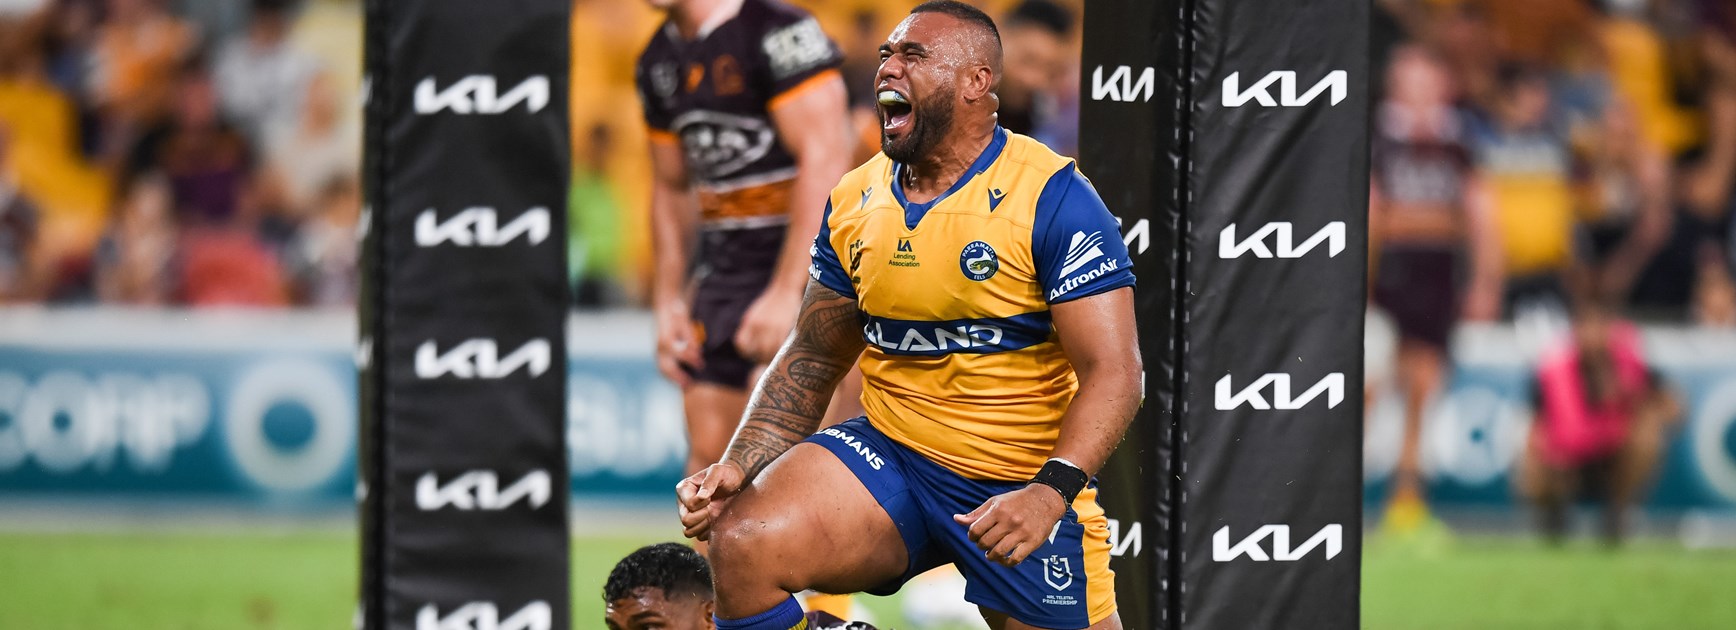 Fan Vote - Eels Man of the Match, Round One